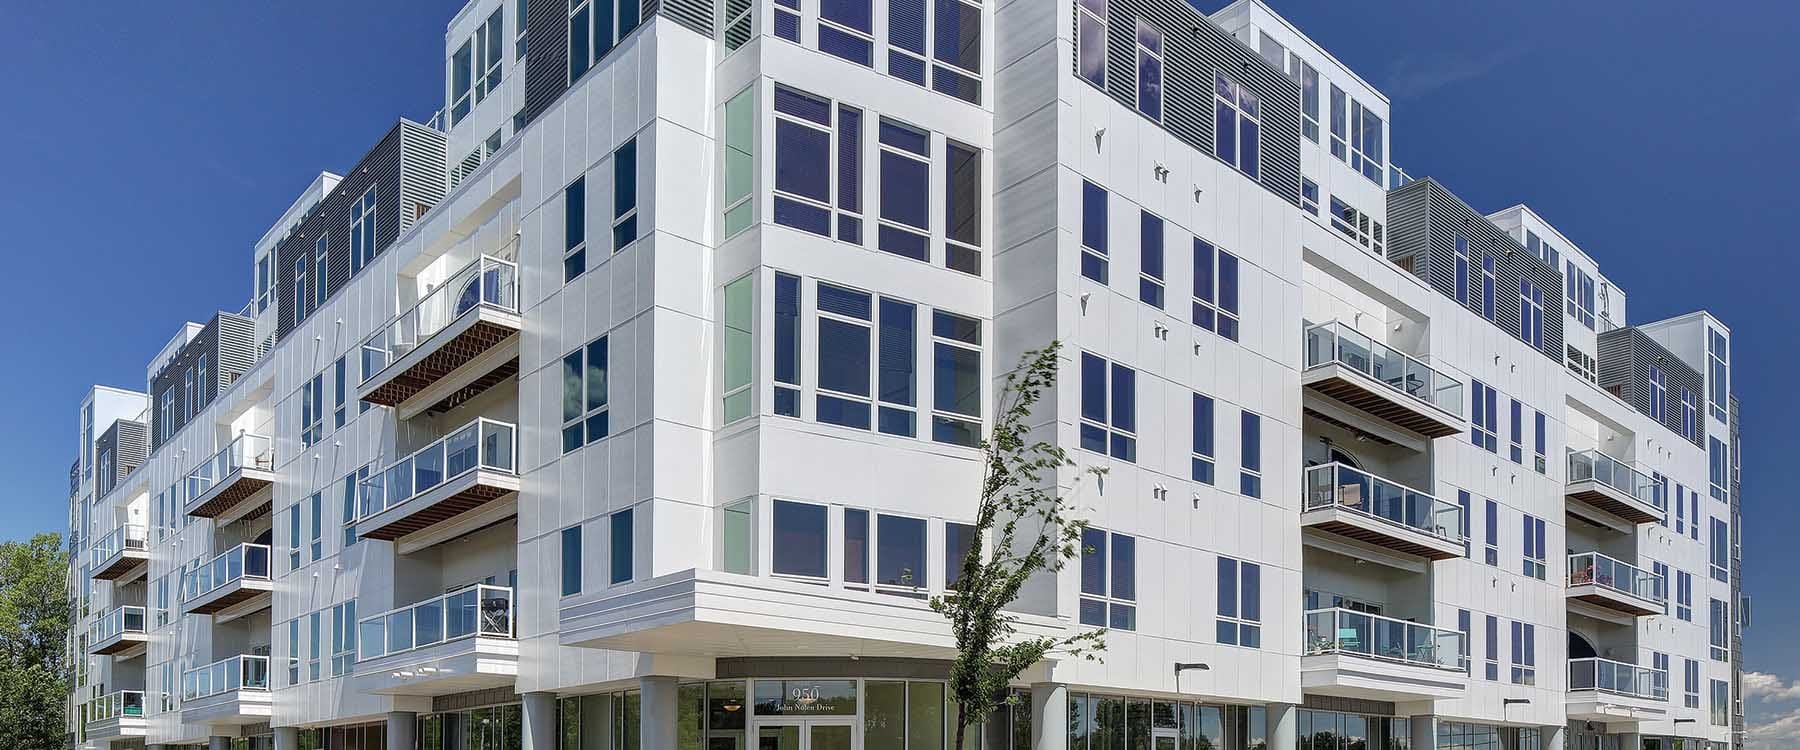 Watermark Lofts Apartments provides contemporary multifamily housing